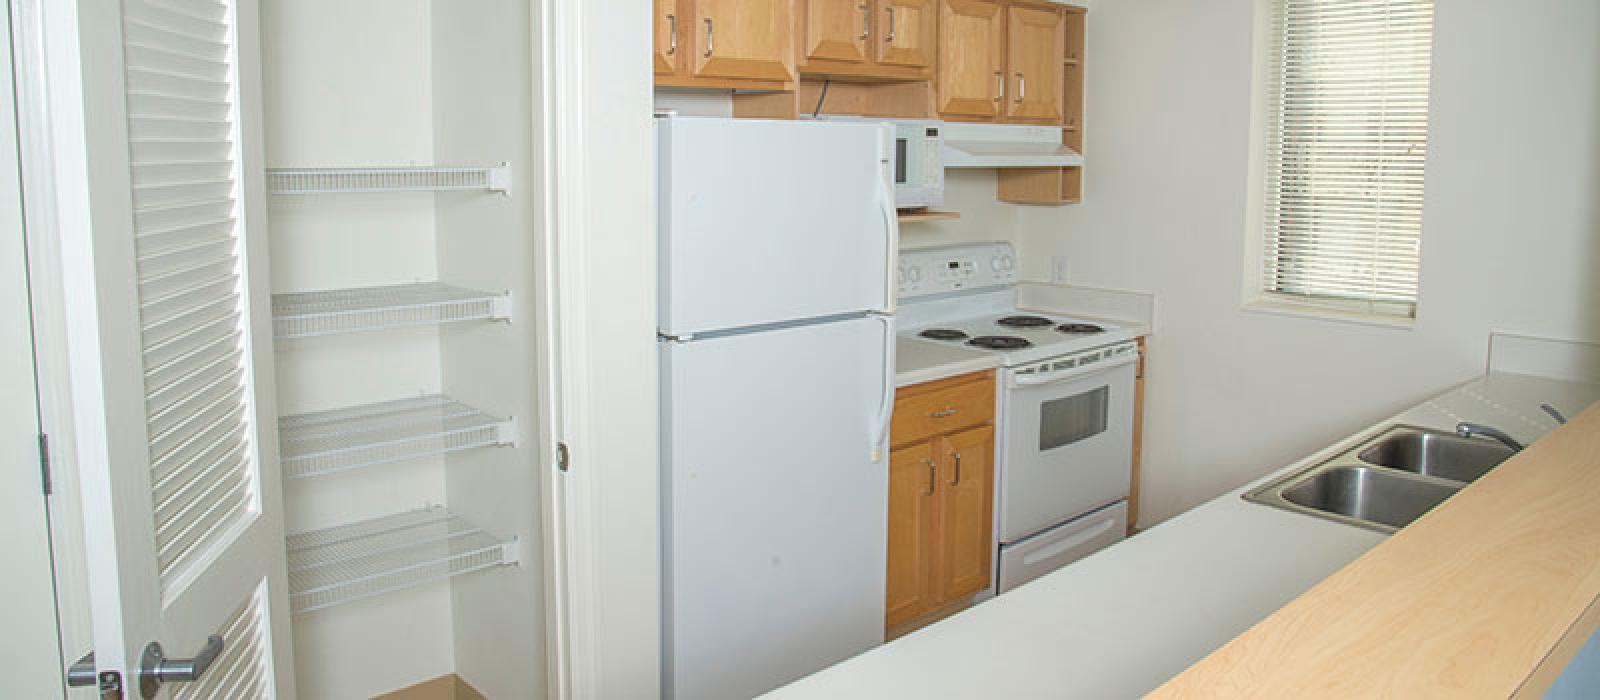 Pantry and kitchen.